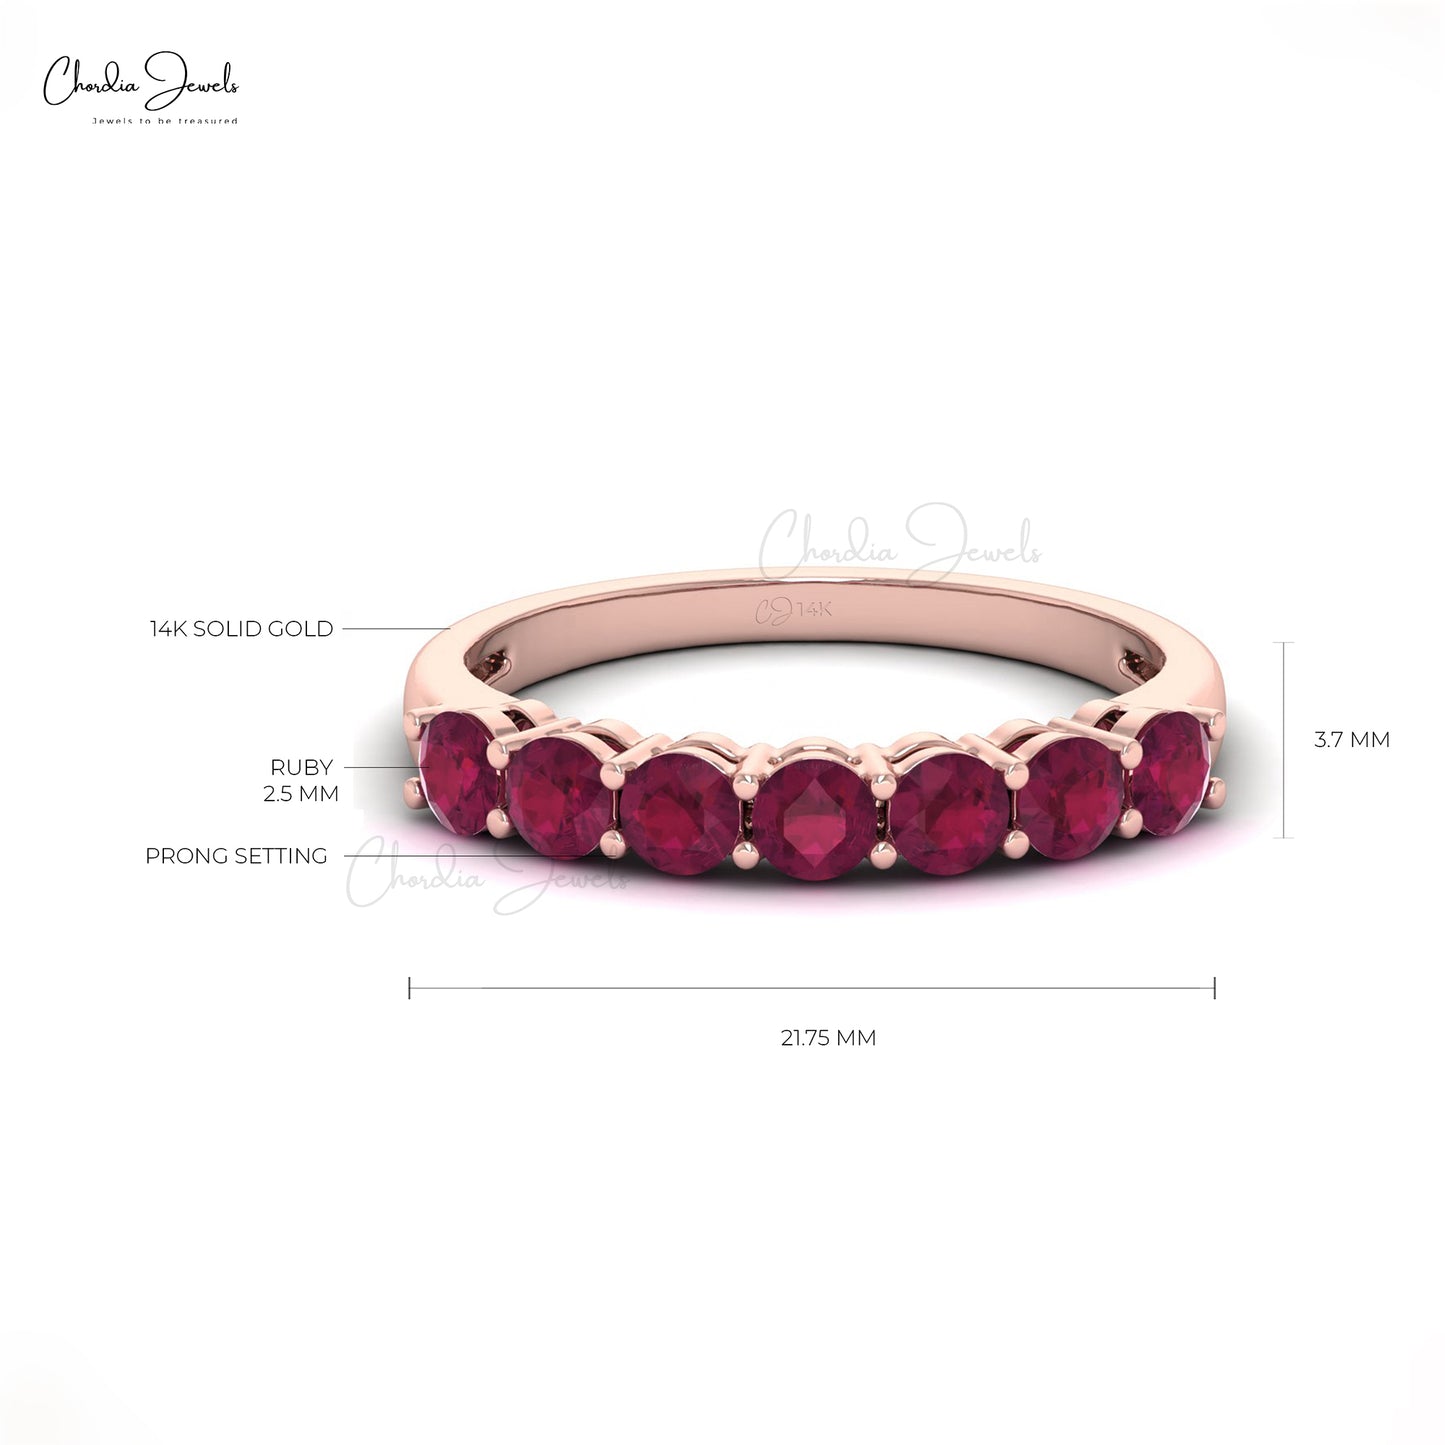 3mm Round Cut Gemstone Eternity Band For Her, Natural Ruby Band Ring in 14k Solid Gold